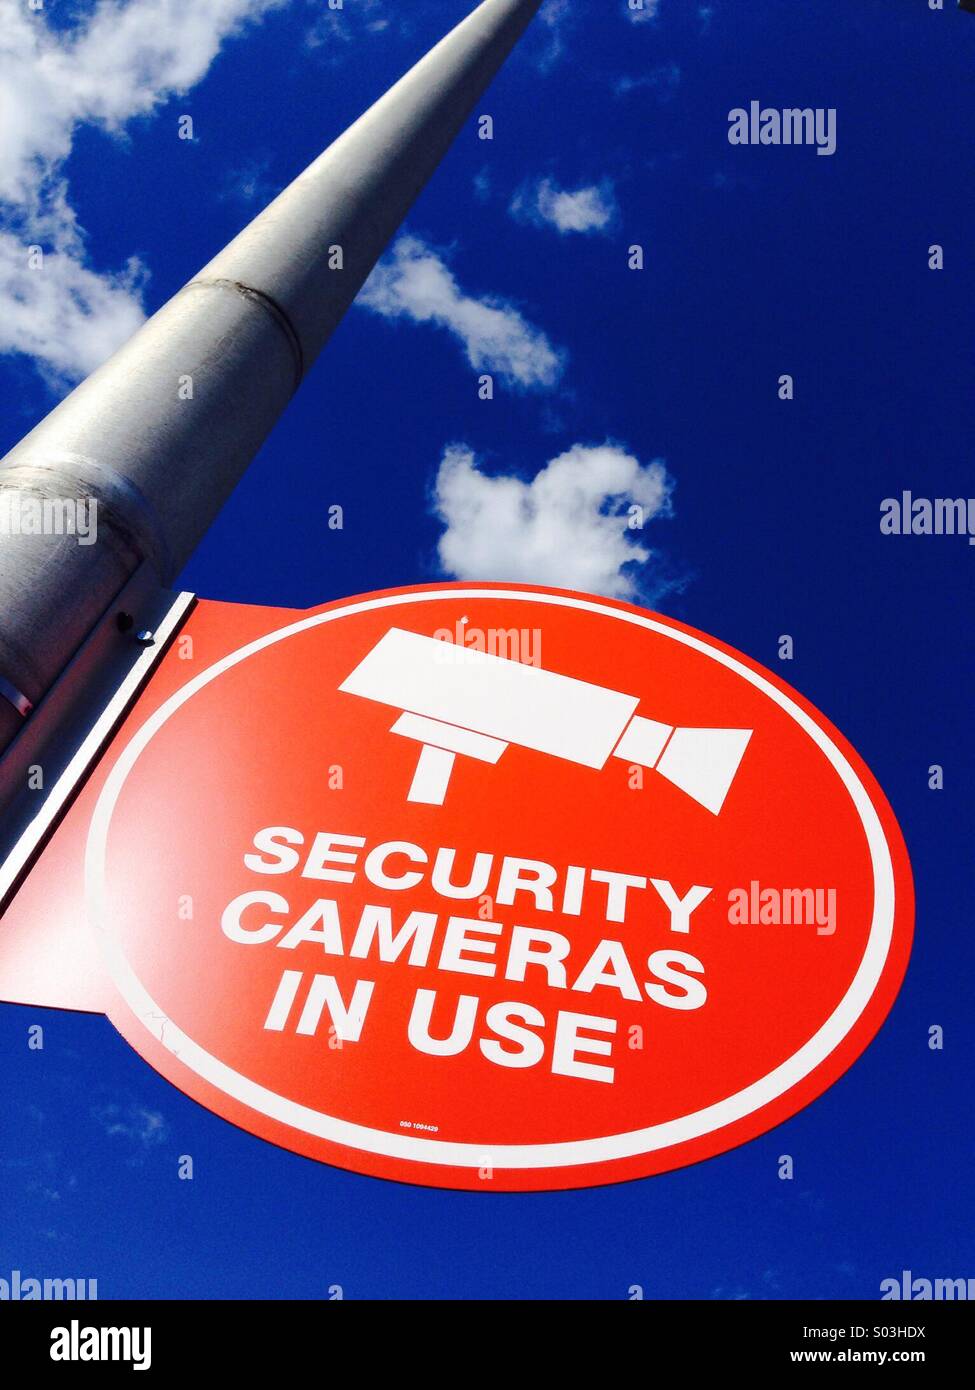 Warning sign for use of security camera. Stock Photo